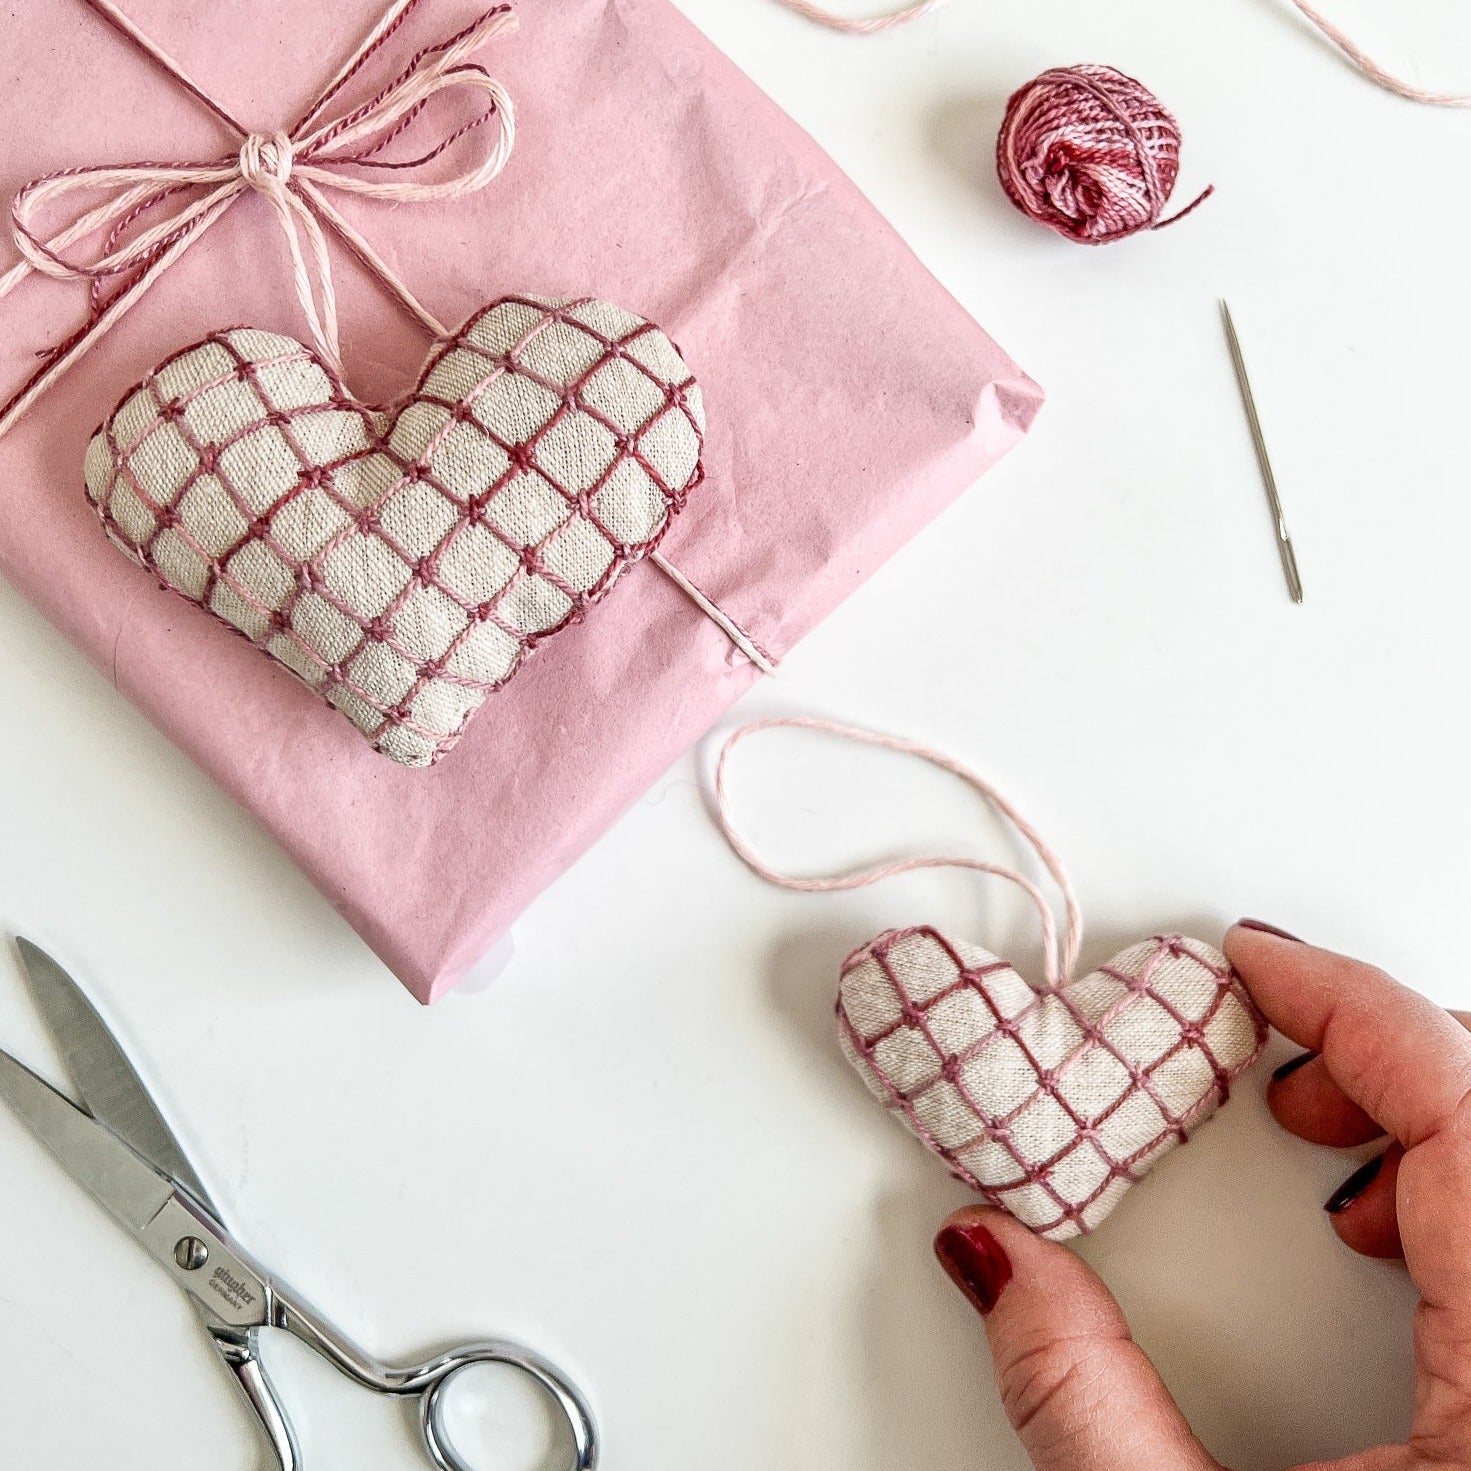 Jane Embroidered Hearts Pattern & Video Class